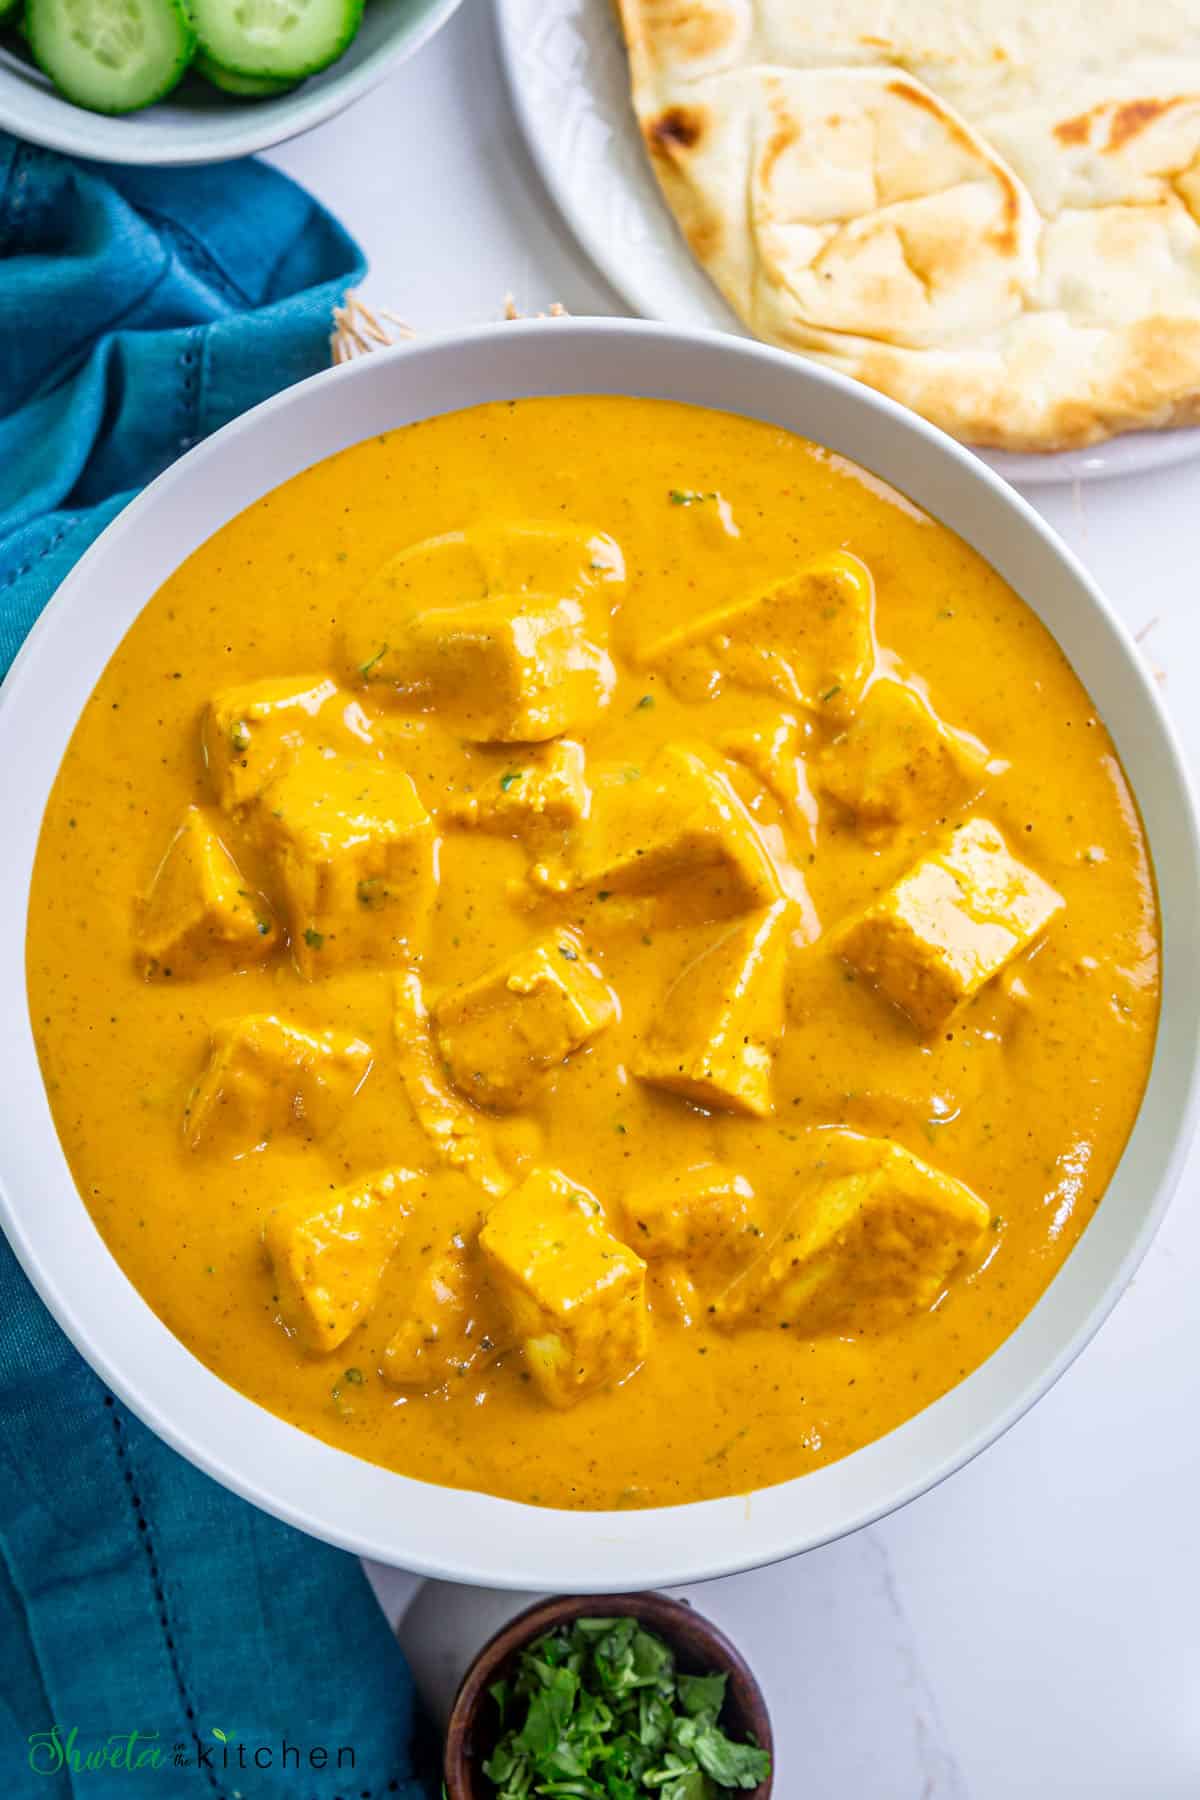 Top view of shahi paneer placed in a bowl with no garnish